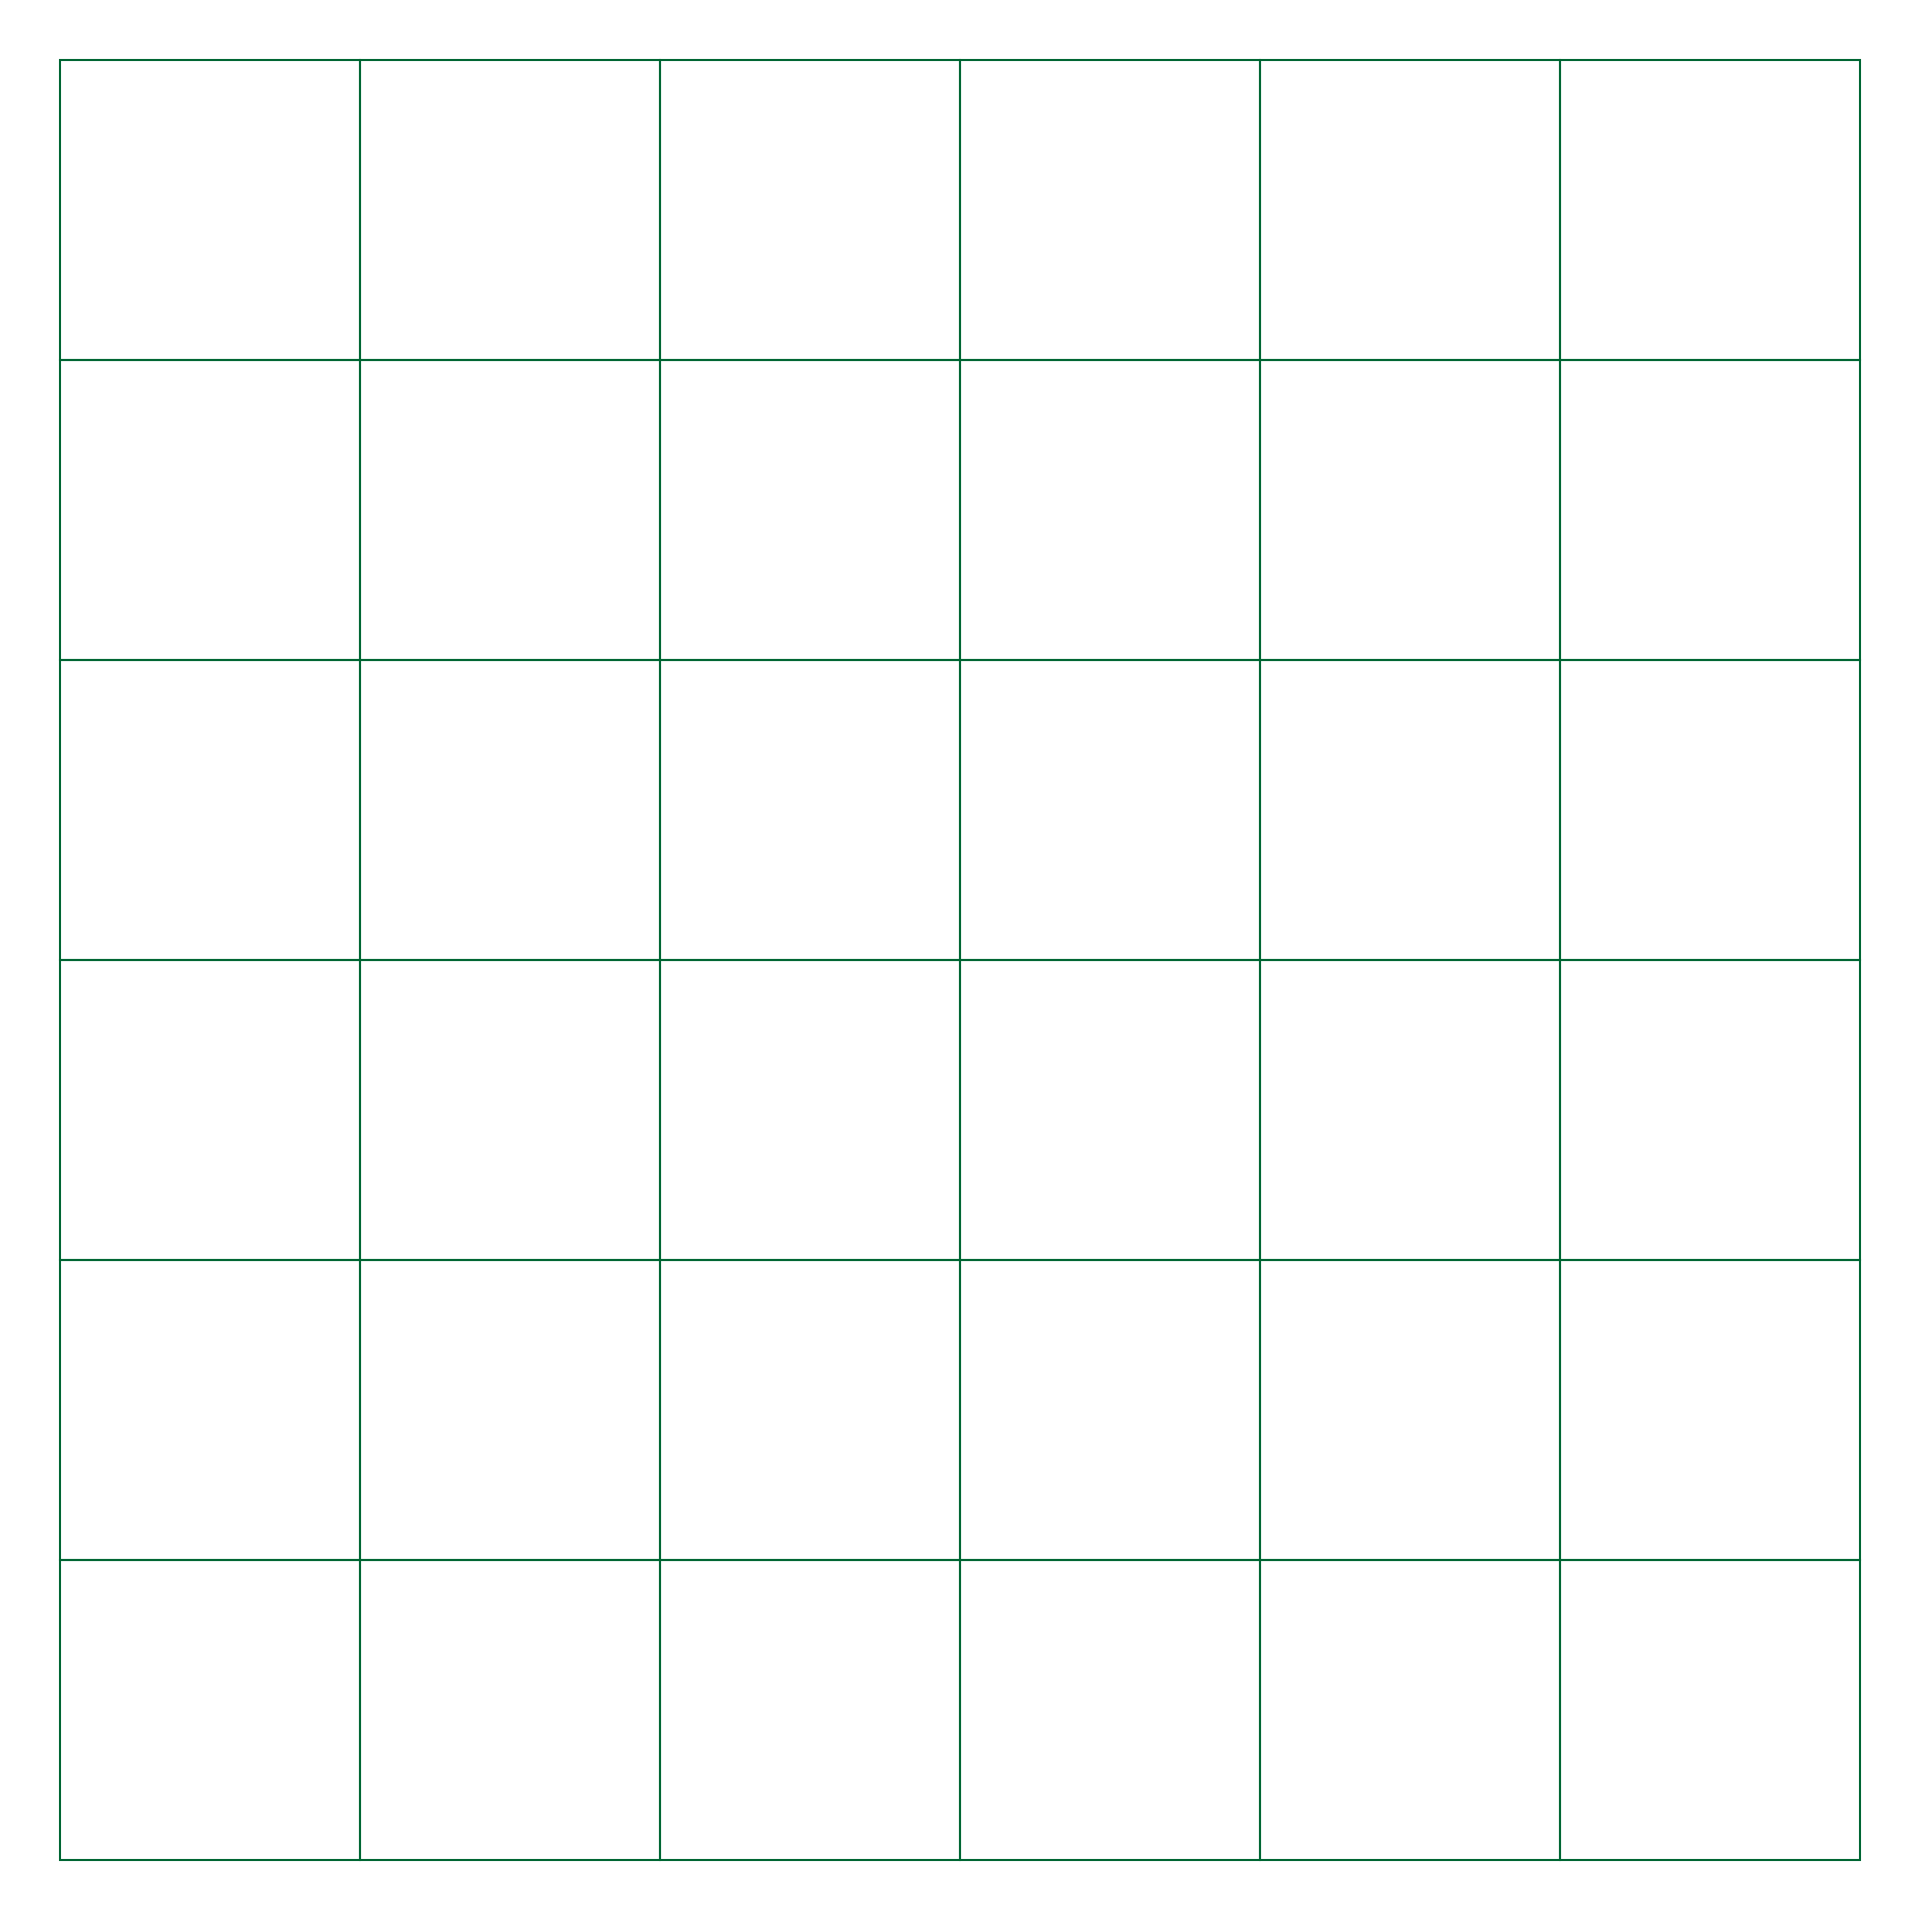 5-best-images-of-square-inch-grid-paper-printable-1-inch-printable